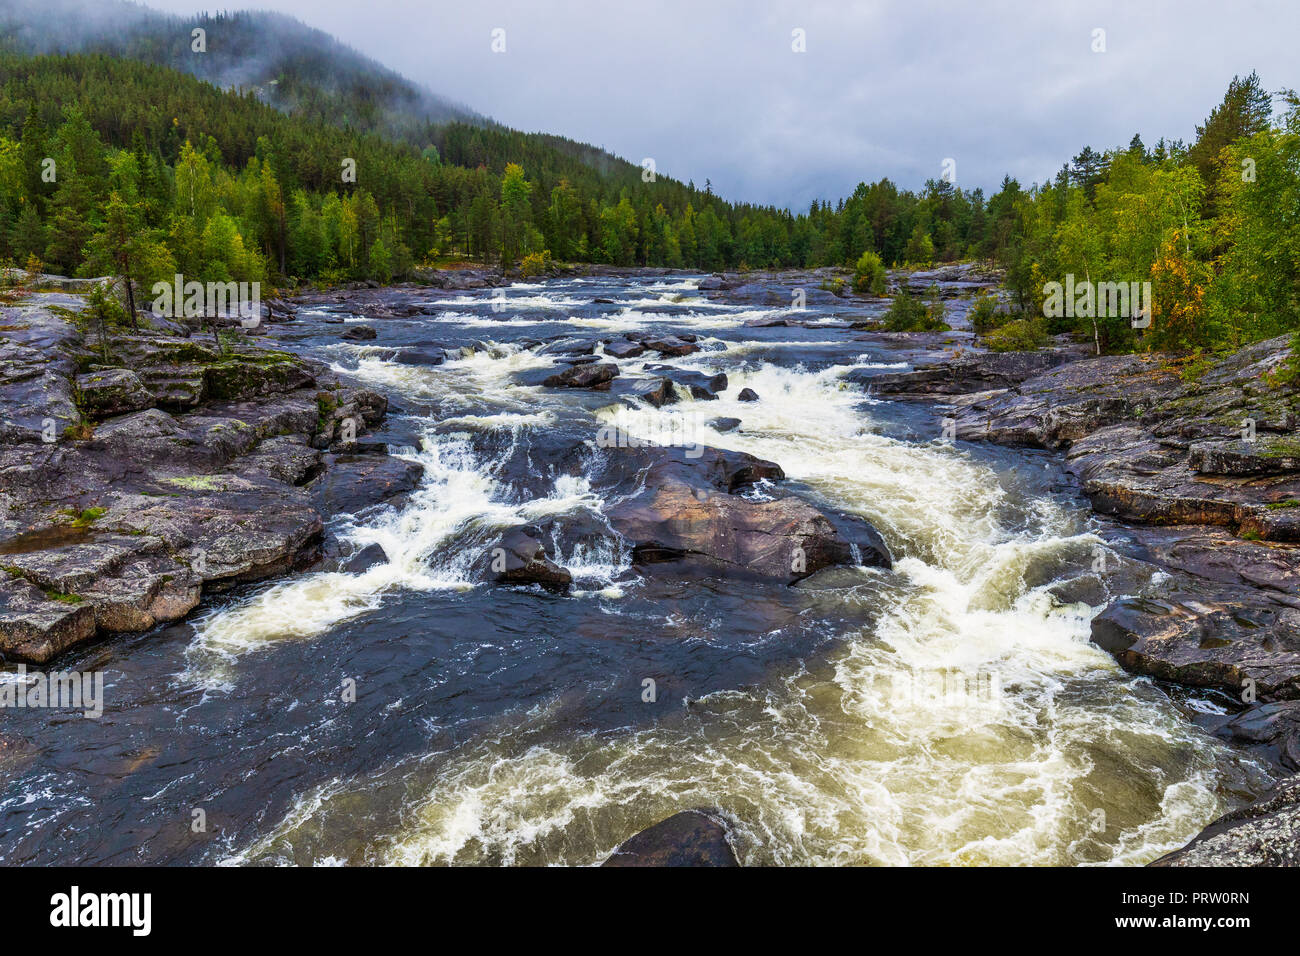 Halingdal river. A wild an natural river in Norway. The wild water is flowing through the rocks. The river is located between Oslo and Bergen. Stock Photo